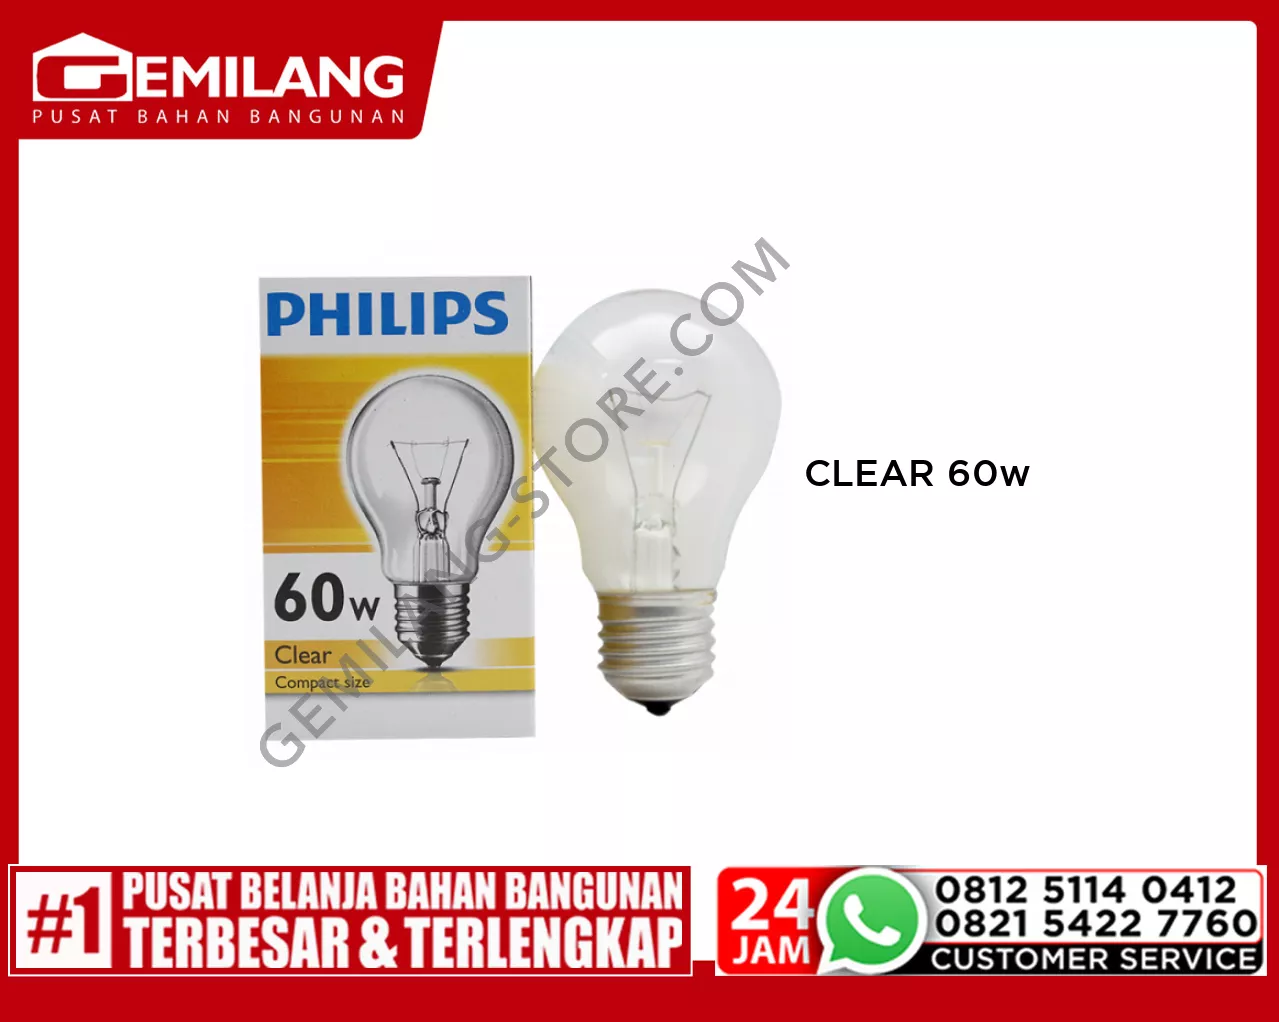 PHILIPS CLEAR 60w